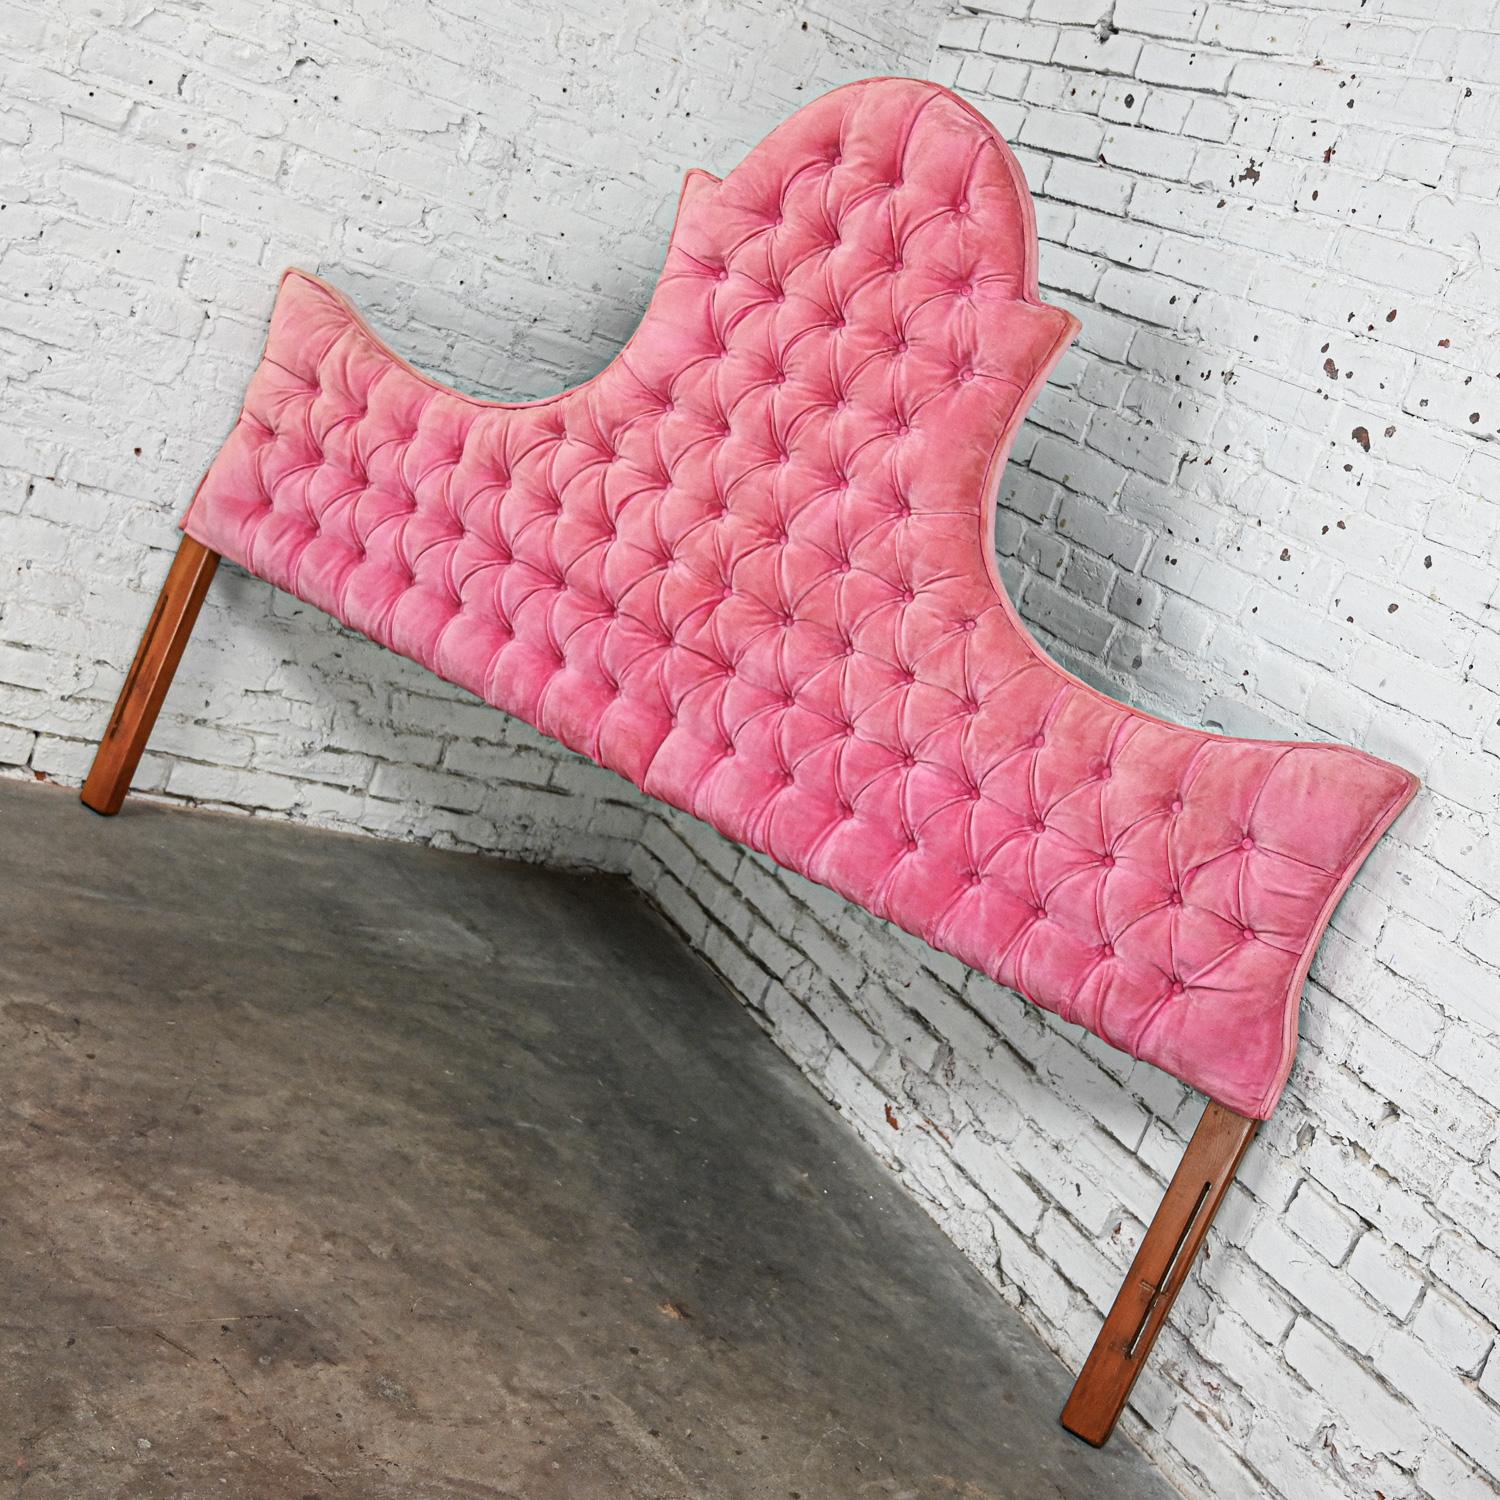 Gorgeous Mid to Late 20th Century Hollywood Regency king sized headboard button tufted pink velvet. Beautiful condition, keeping in mind that this is vintage and not new so will have signs of use and wear even if it has been refinished or restored.